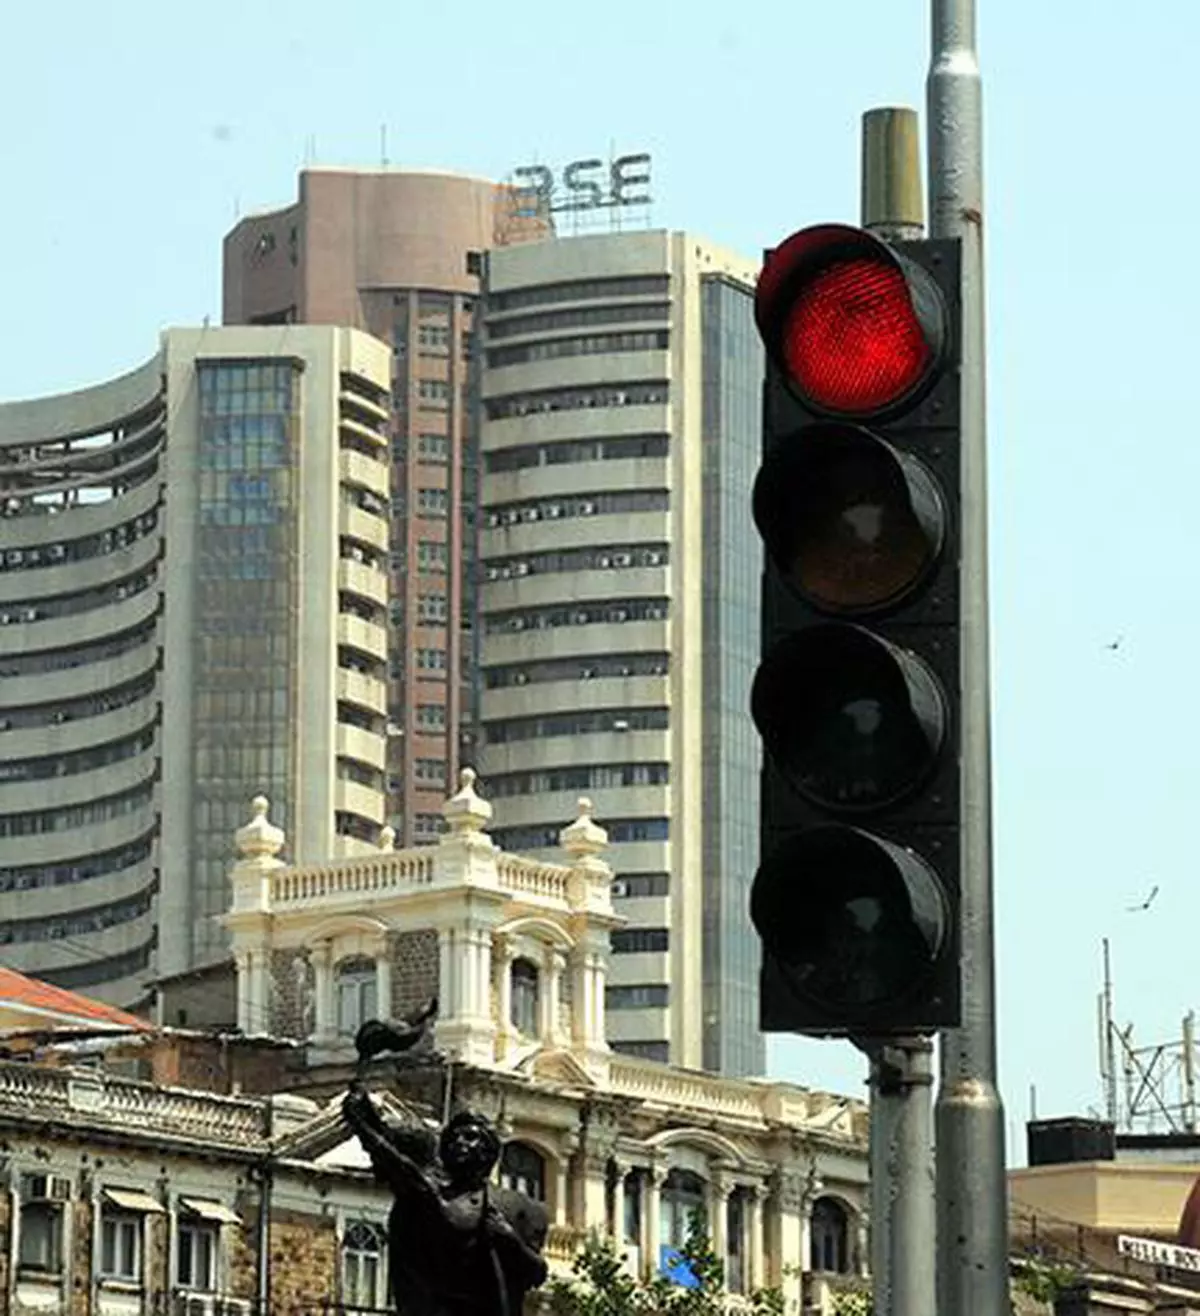 MUMBAI, MAHARASHTRA, 06/05/2015: A traffic signal in the foreground of the Bombay Stock Exchange on Dalal Street seems to reflect the mood of the stock markets in Mumbai